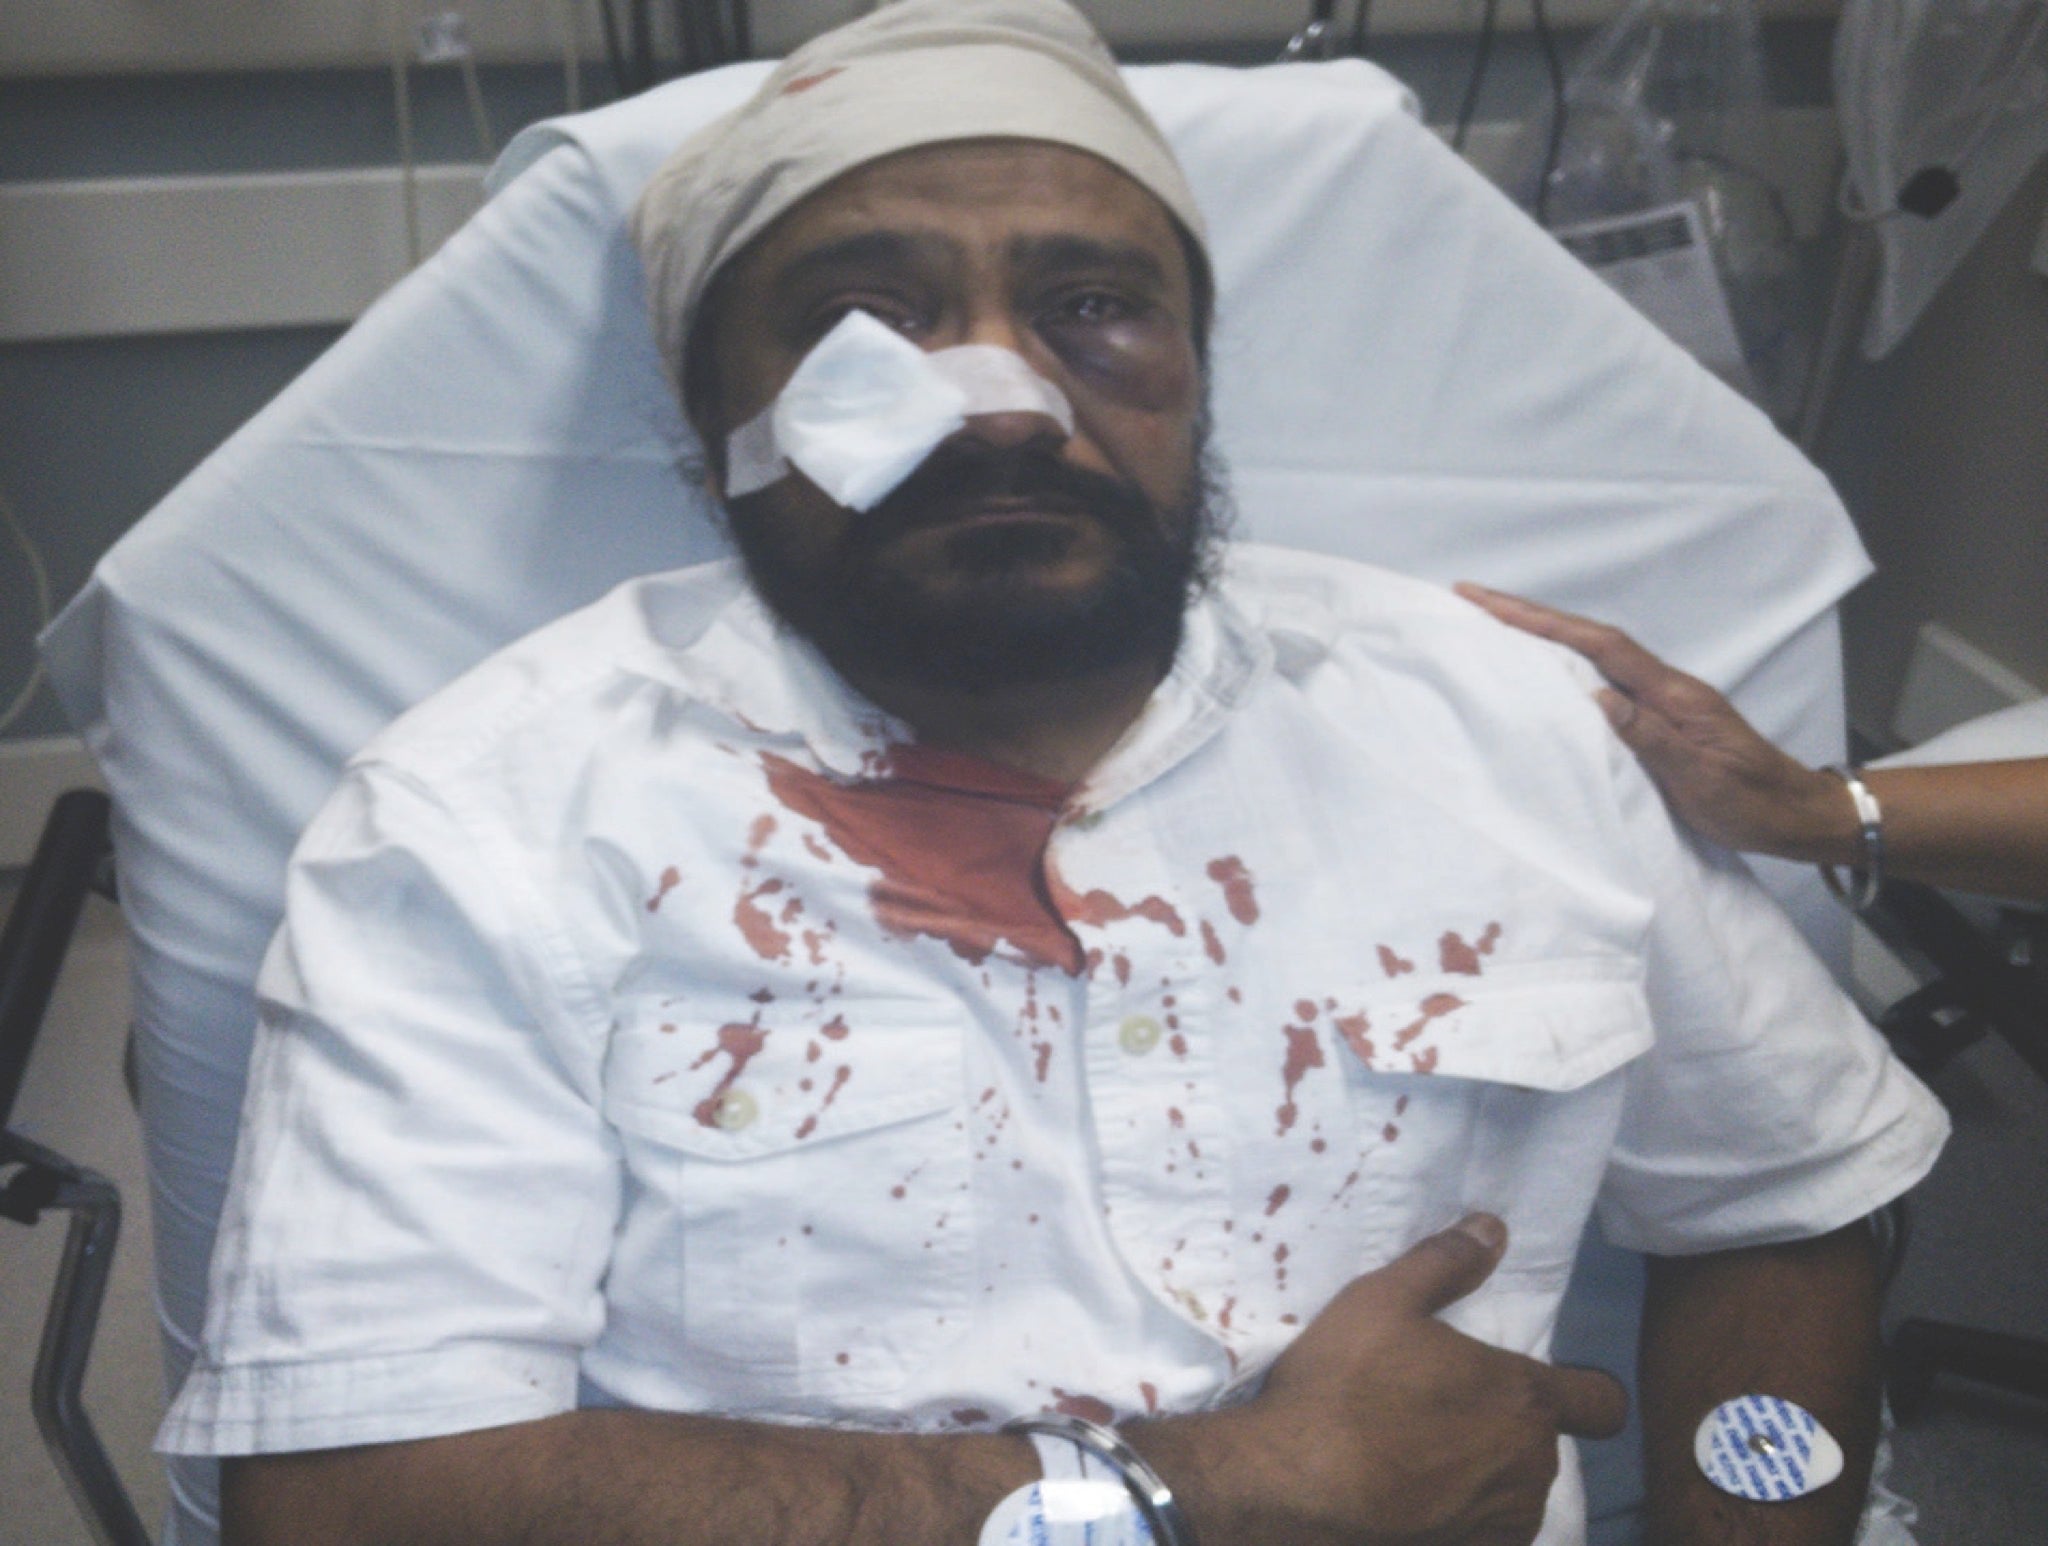 Inderjit Singh Mukker was attacked while driving to the shops